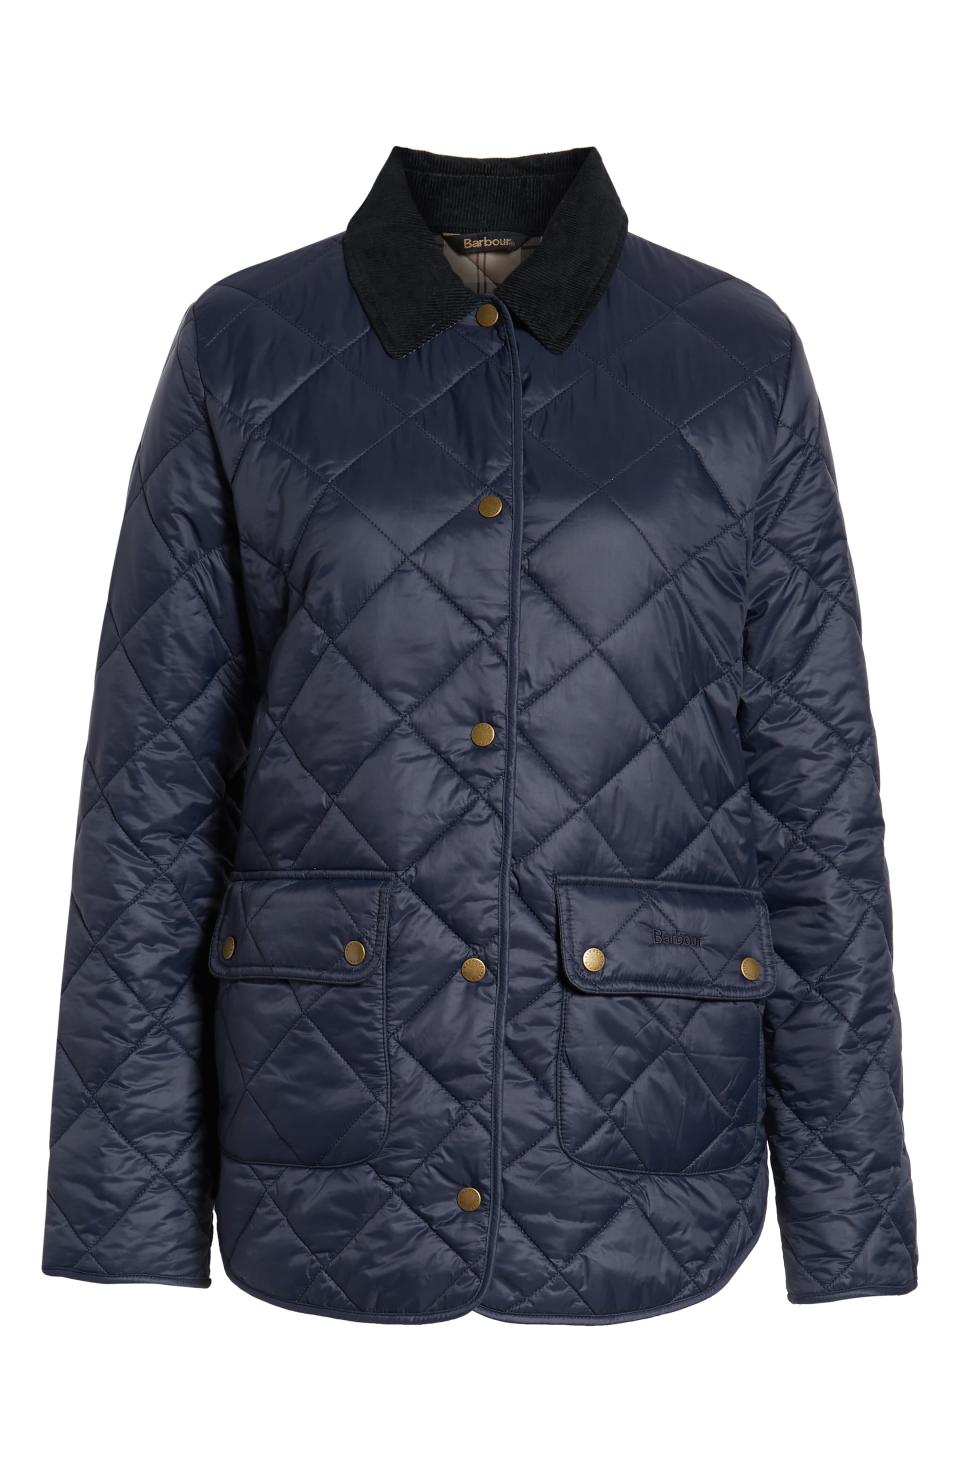 2) Barbour